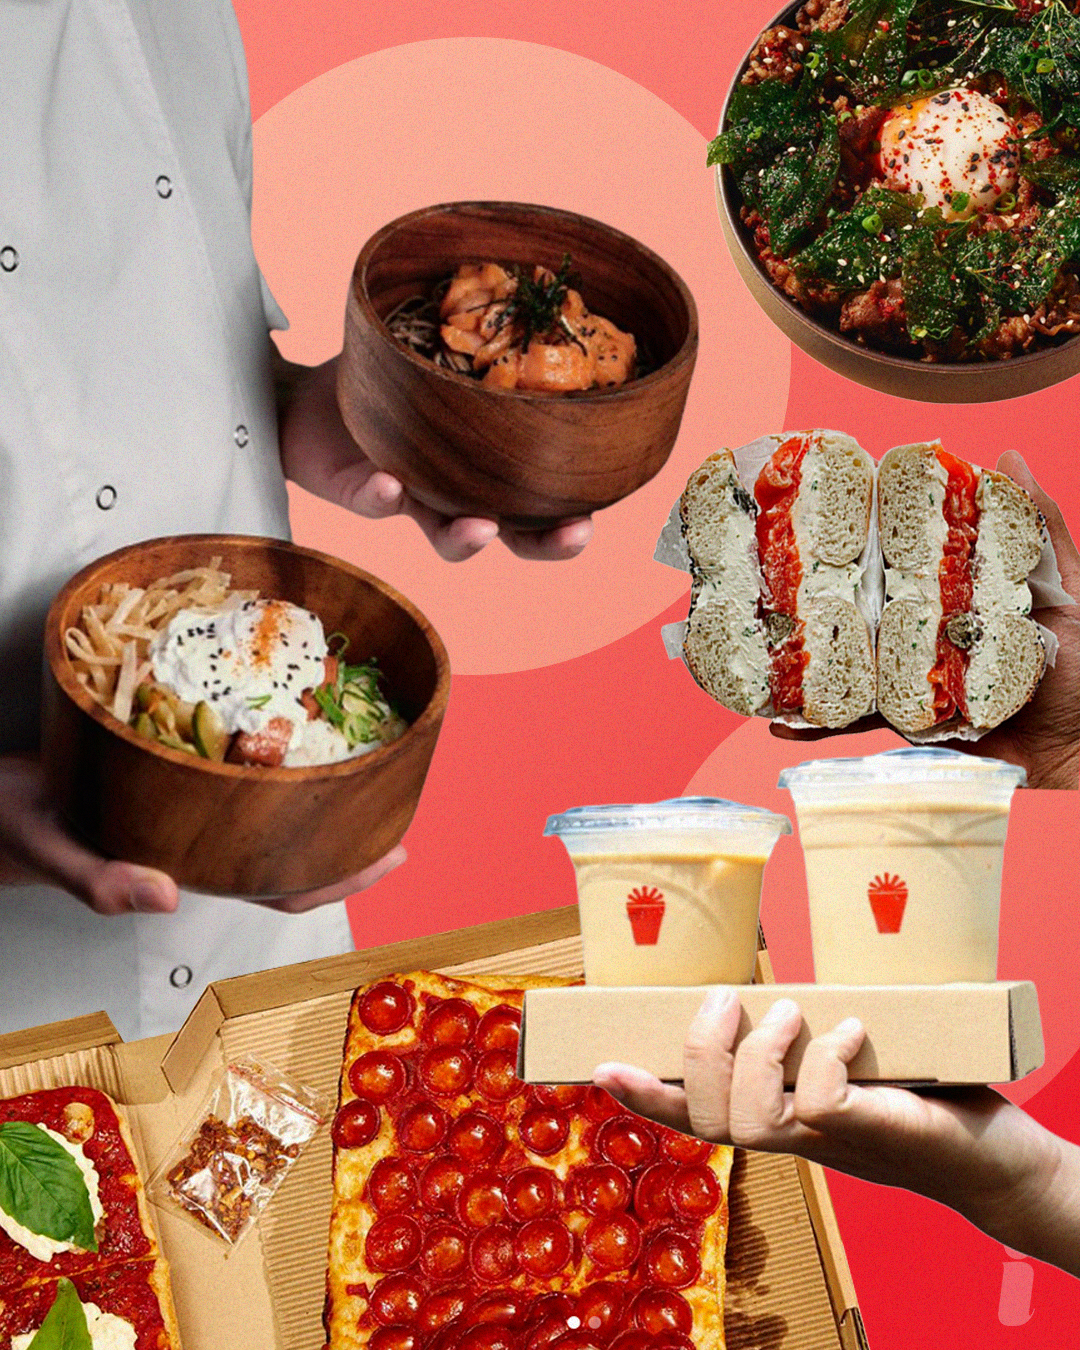 LIFESTYLE.INQ PICKS: Our 2023 Office Food Favorites